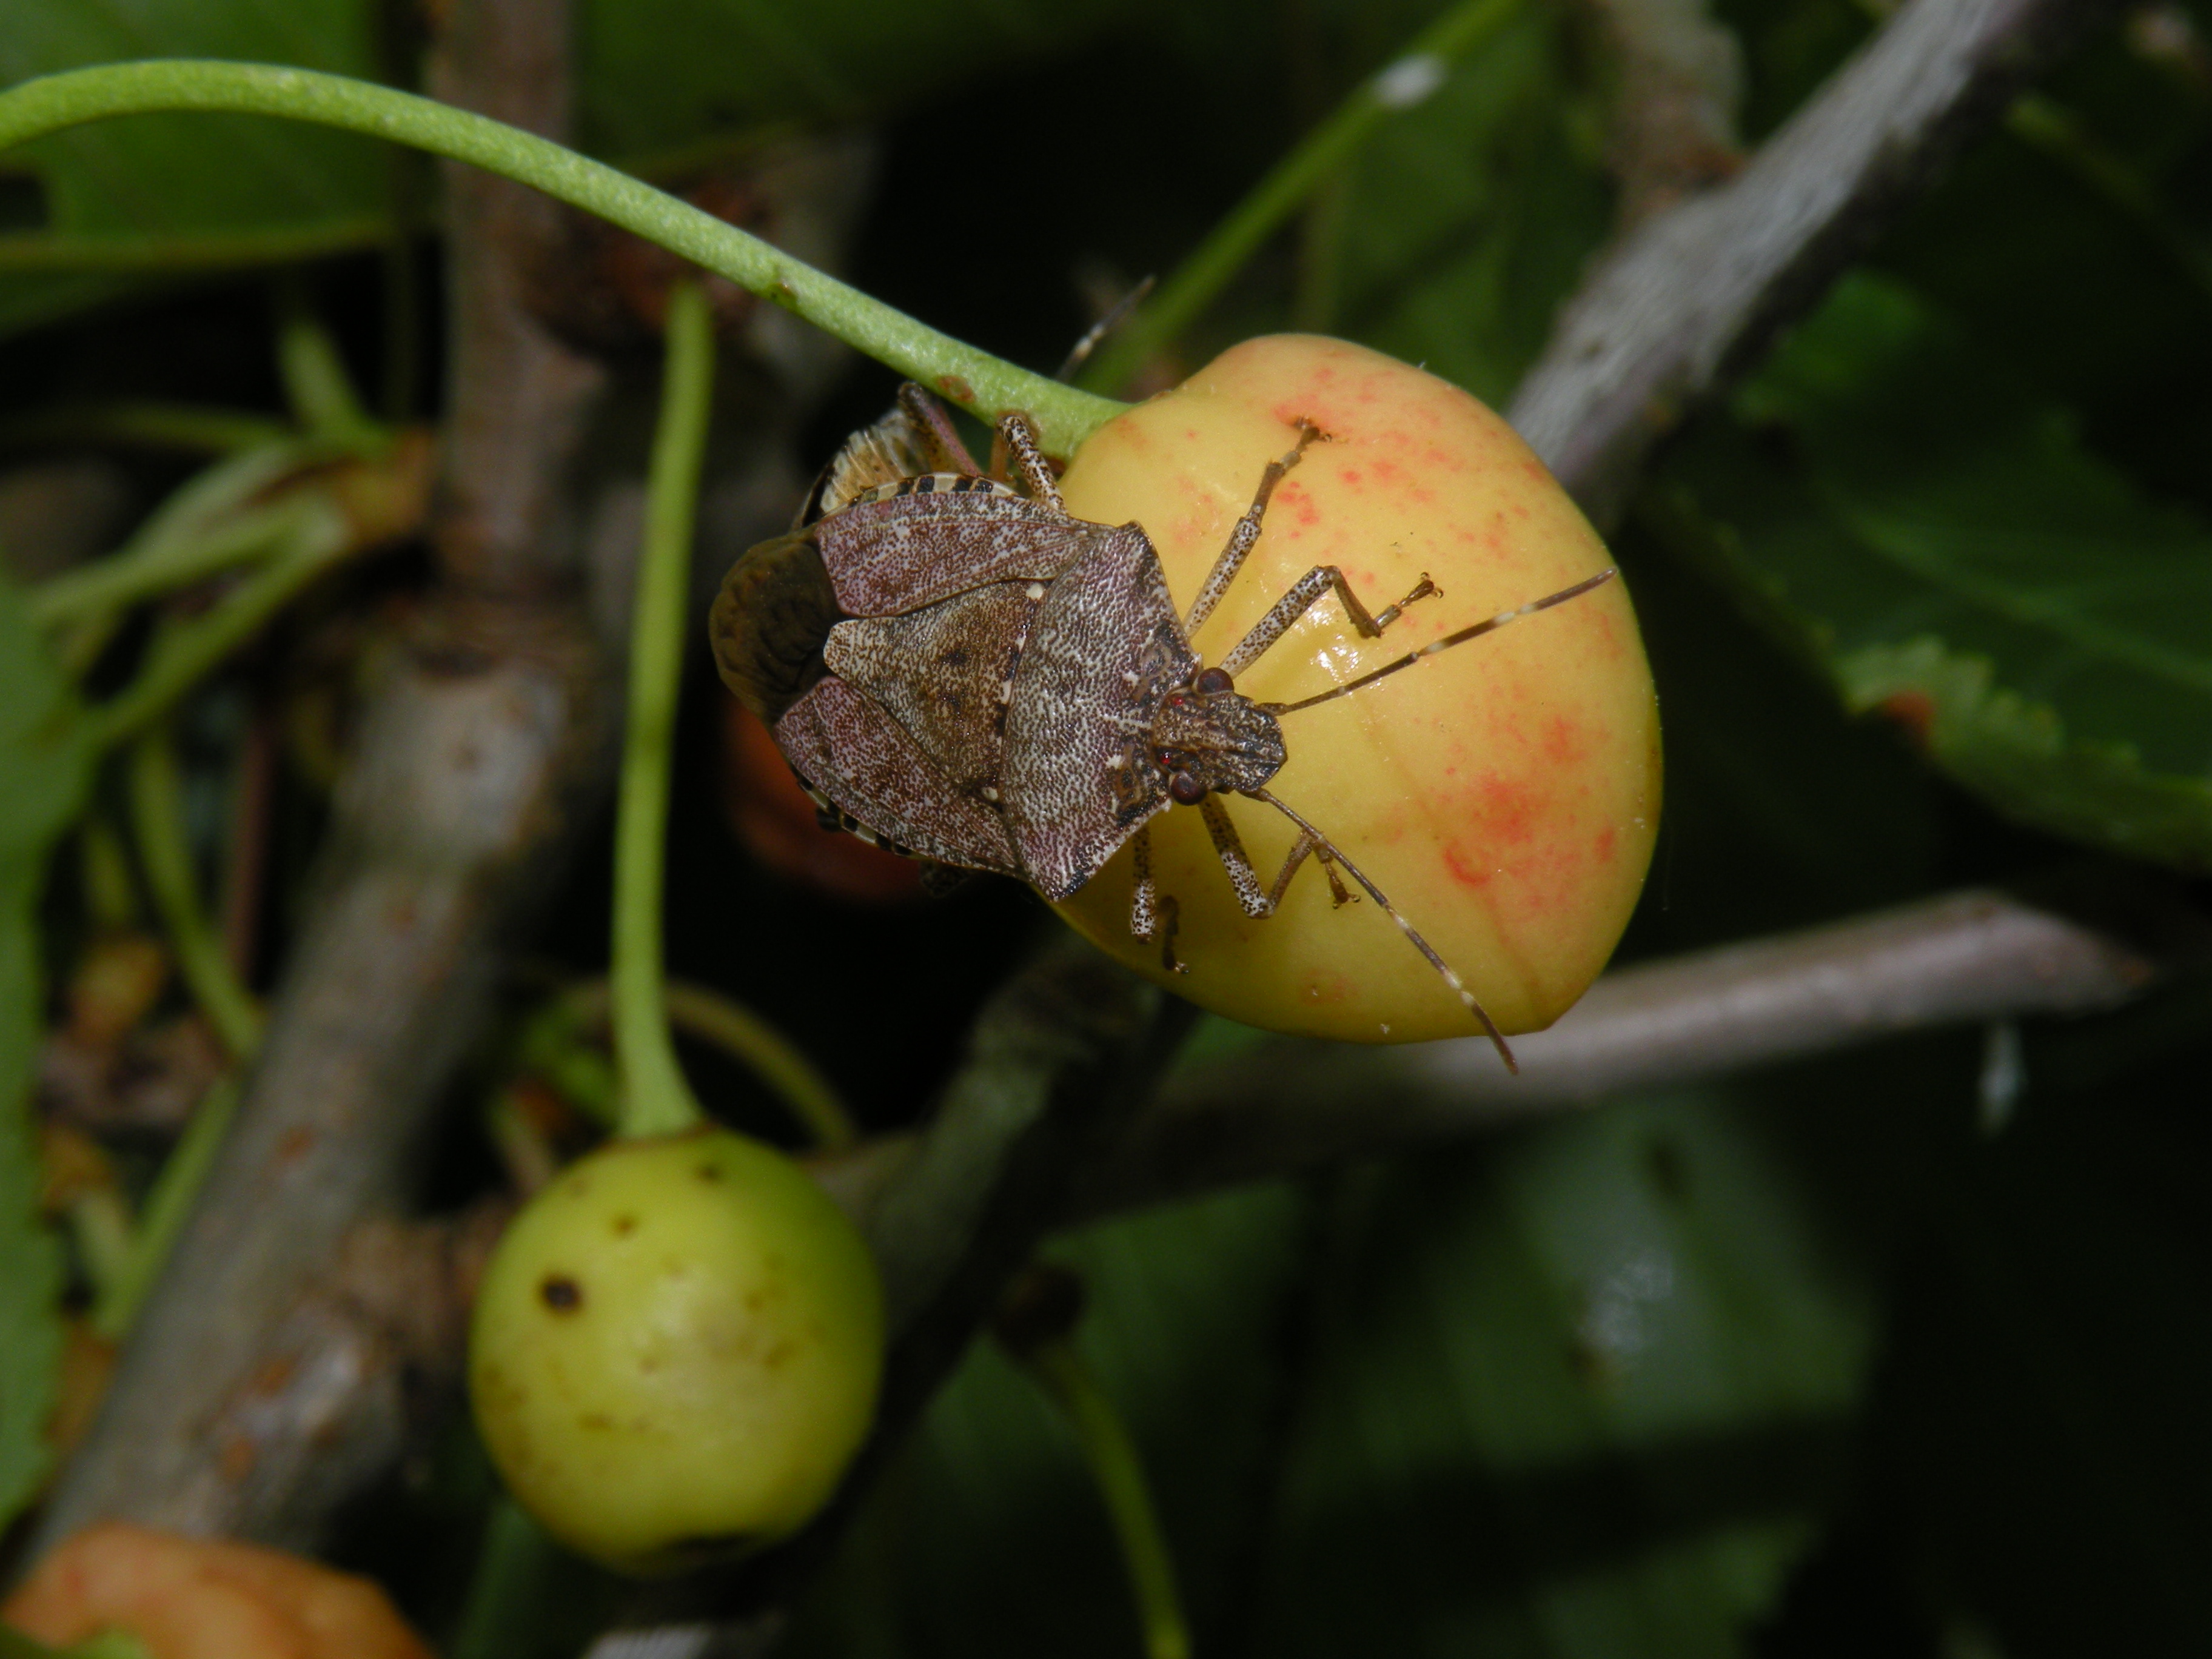 An adult of the brown marmorated stinkbug feeds on an unripe cherry.